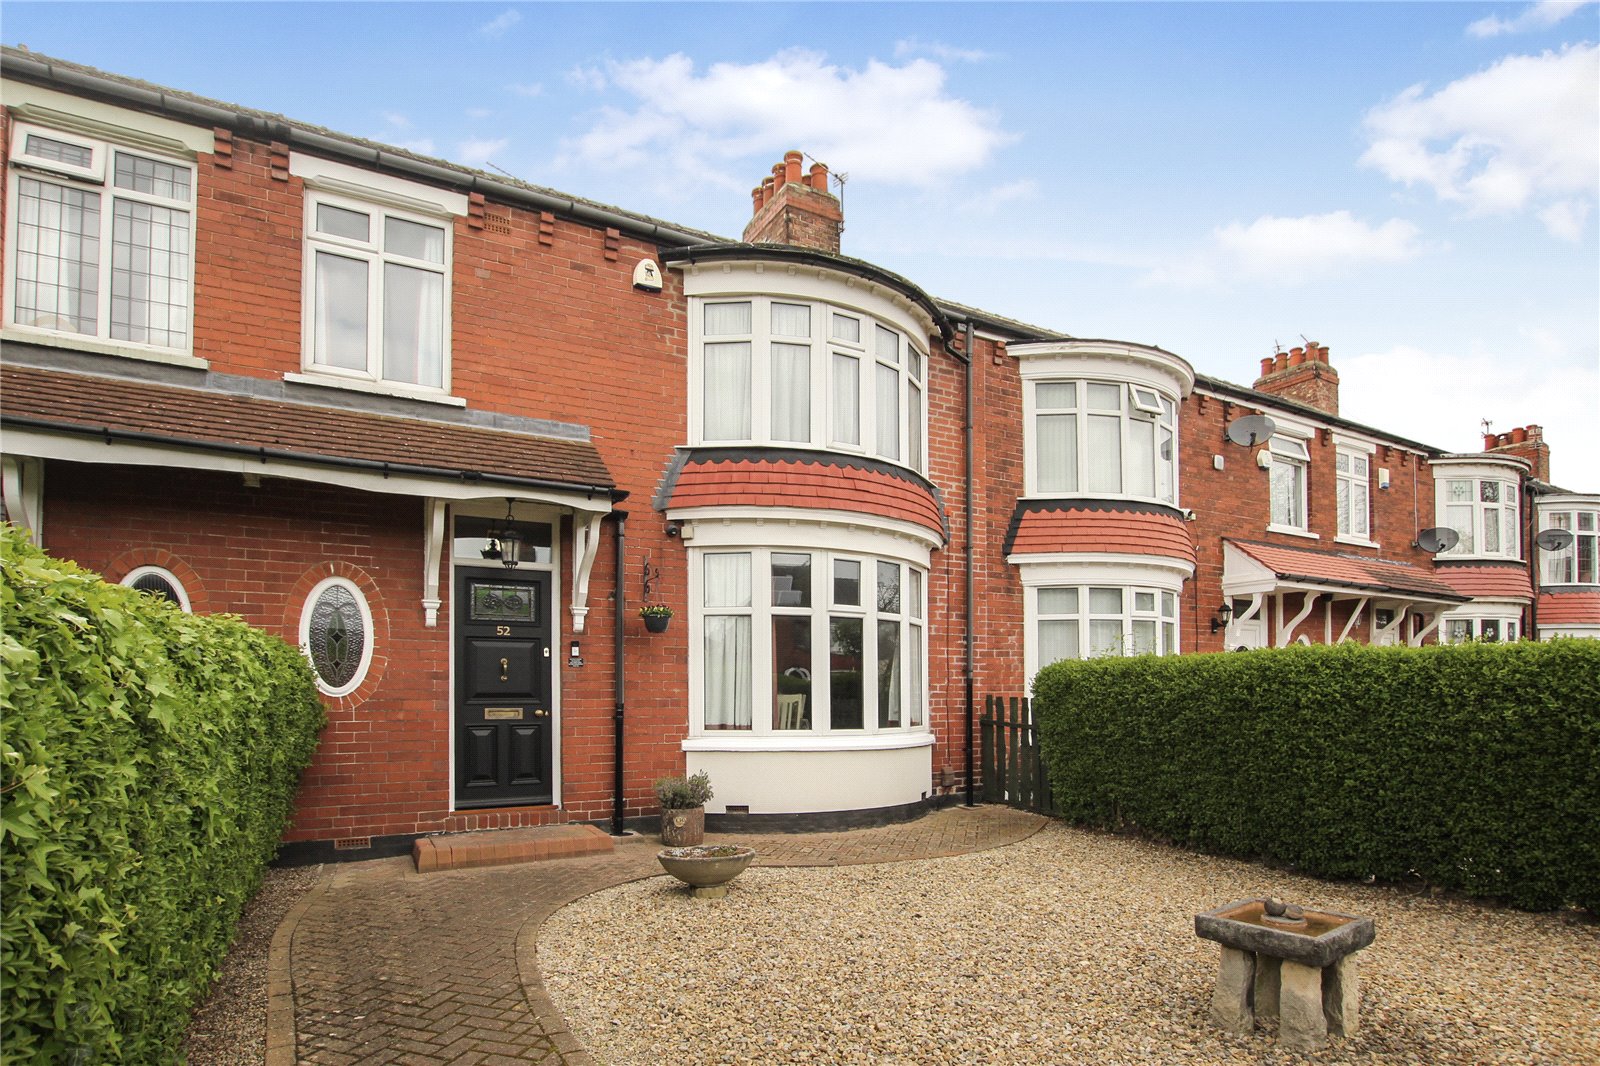 4 bed house for sale in Thornfield Road, Linthorpe  - Property Image 1